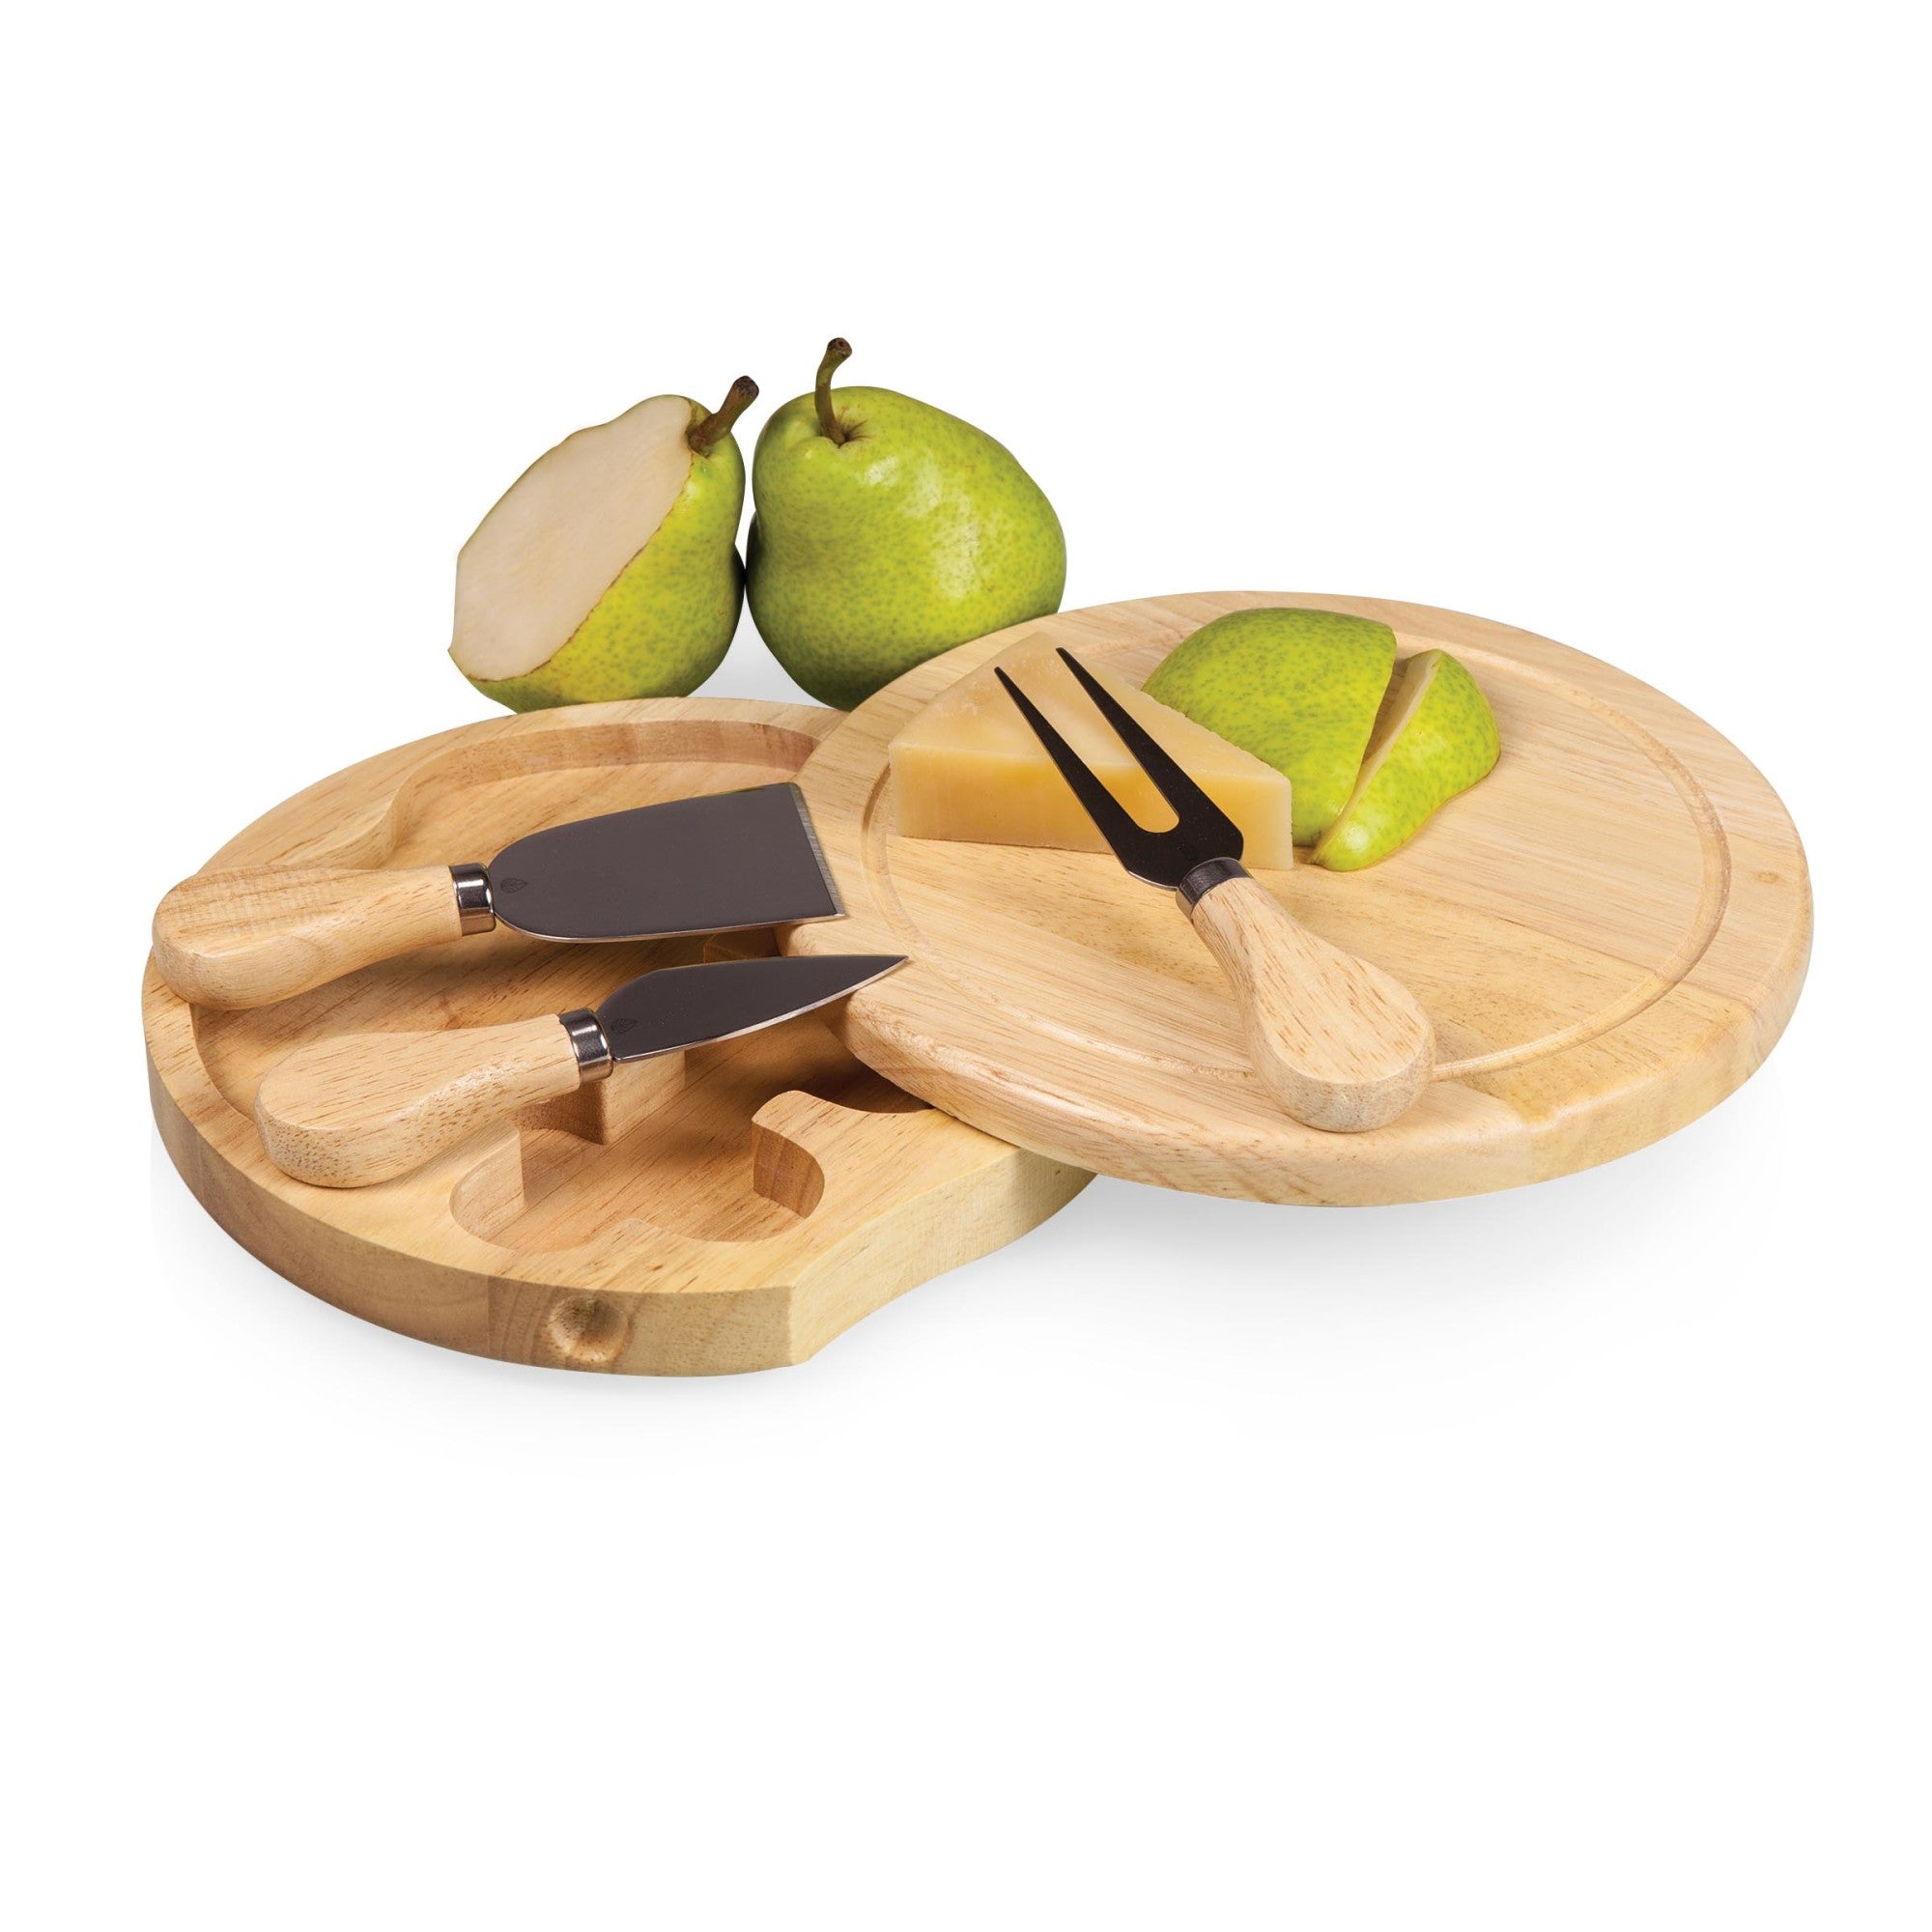 San Francisco Giants - Brie Cheese Cutting Board & Tools Set